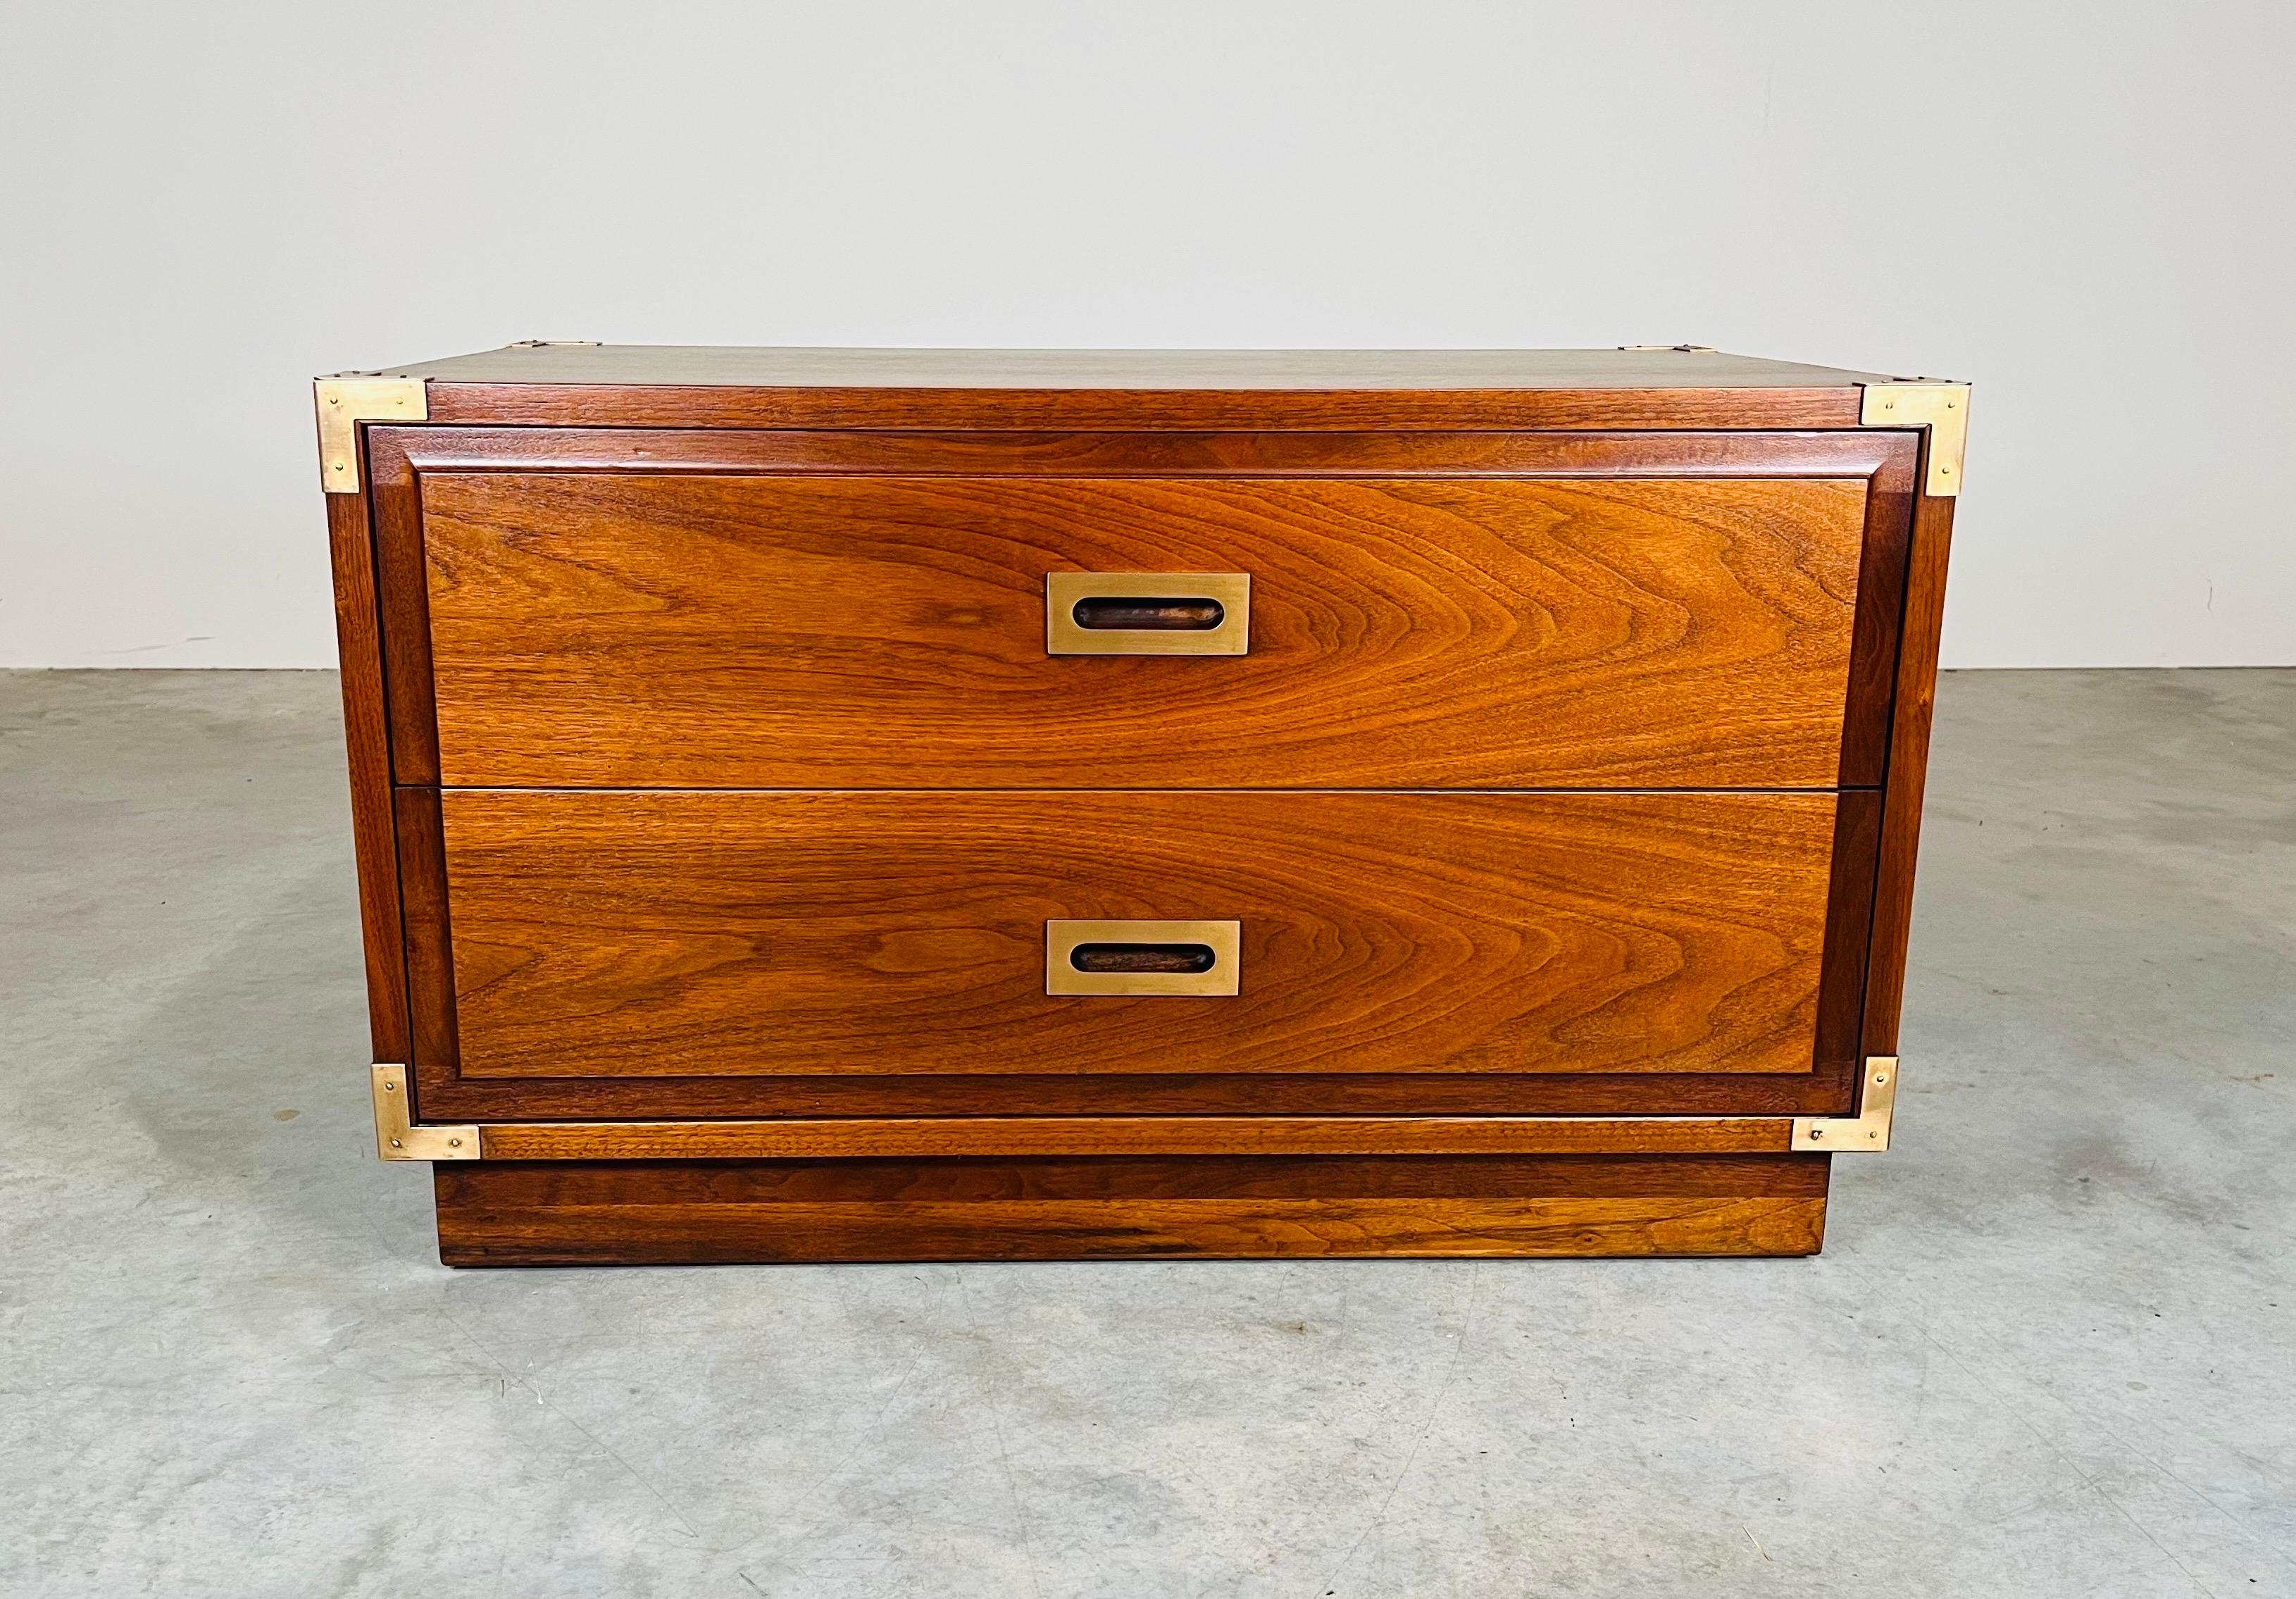 Handsome 2-drawer Campaign Style chest having solid walnut construction with brass pulls, side handles and corner accents. Incredible craftsmanship throughout with great detail and stunning walnut grain. Finished on all sides. 
In excellent